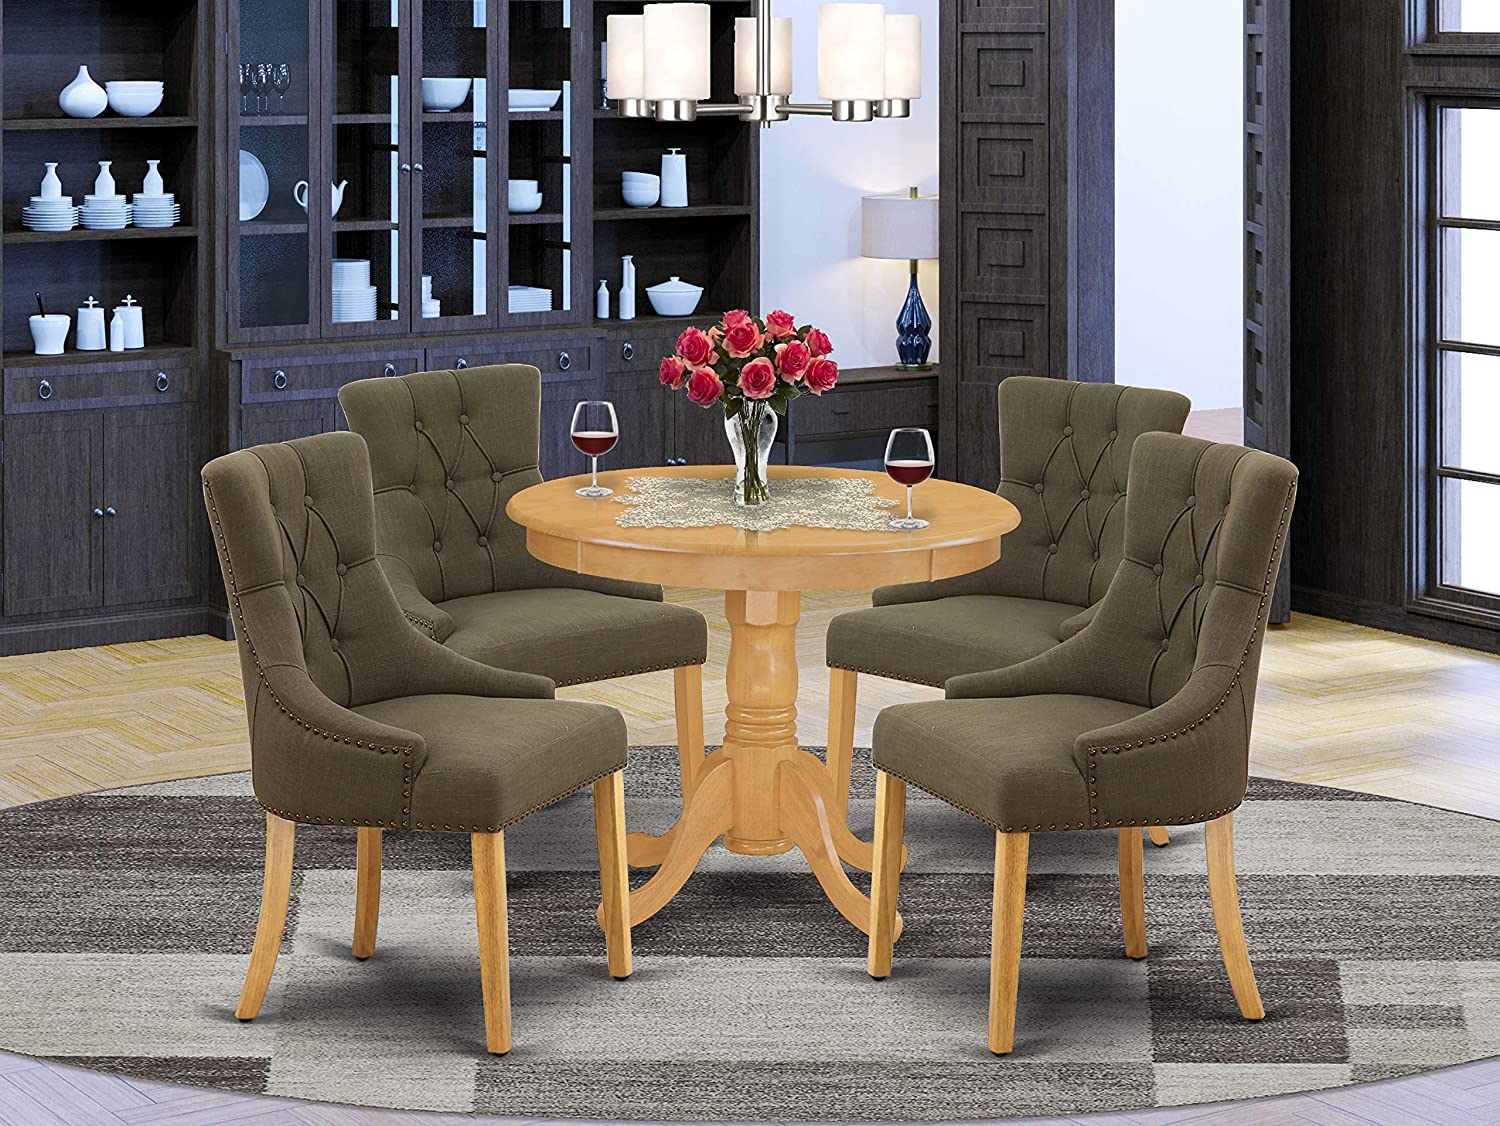 East West Furniture 5Pc Dining Set Includes a Small Round Dinette Table and Four Parson Chairs with Dark Gotham Grey Fabric, Oak Finish